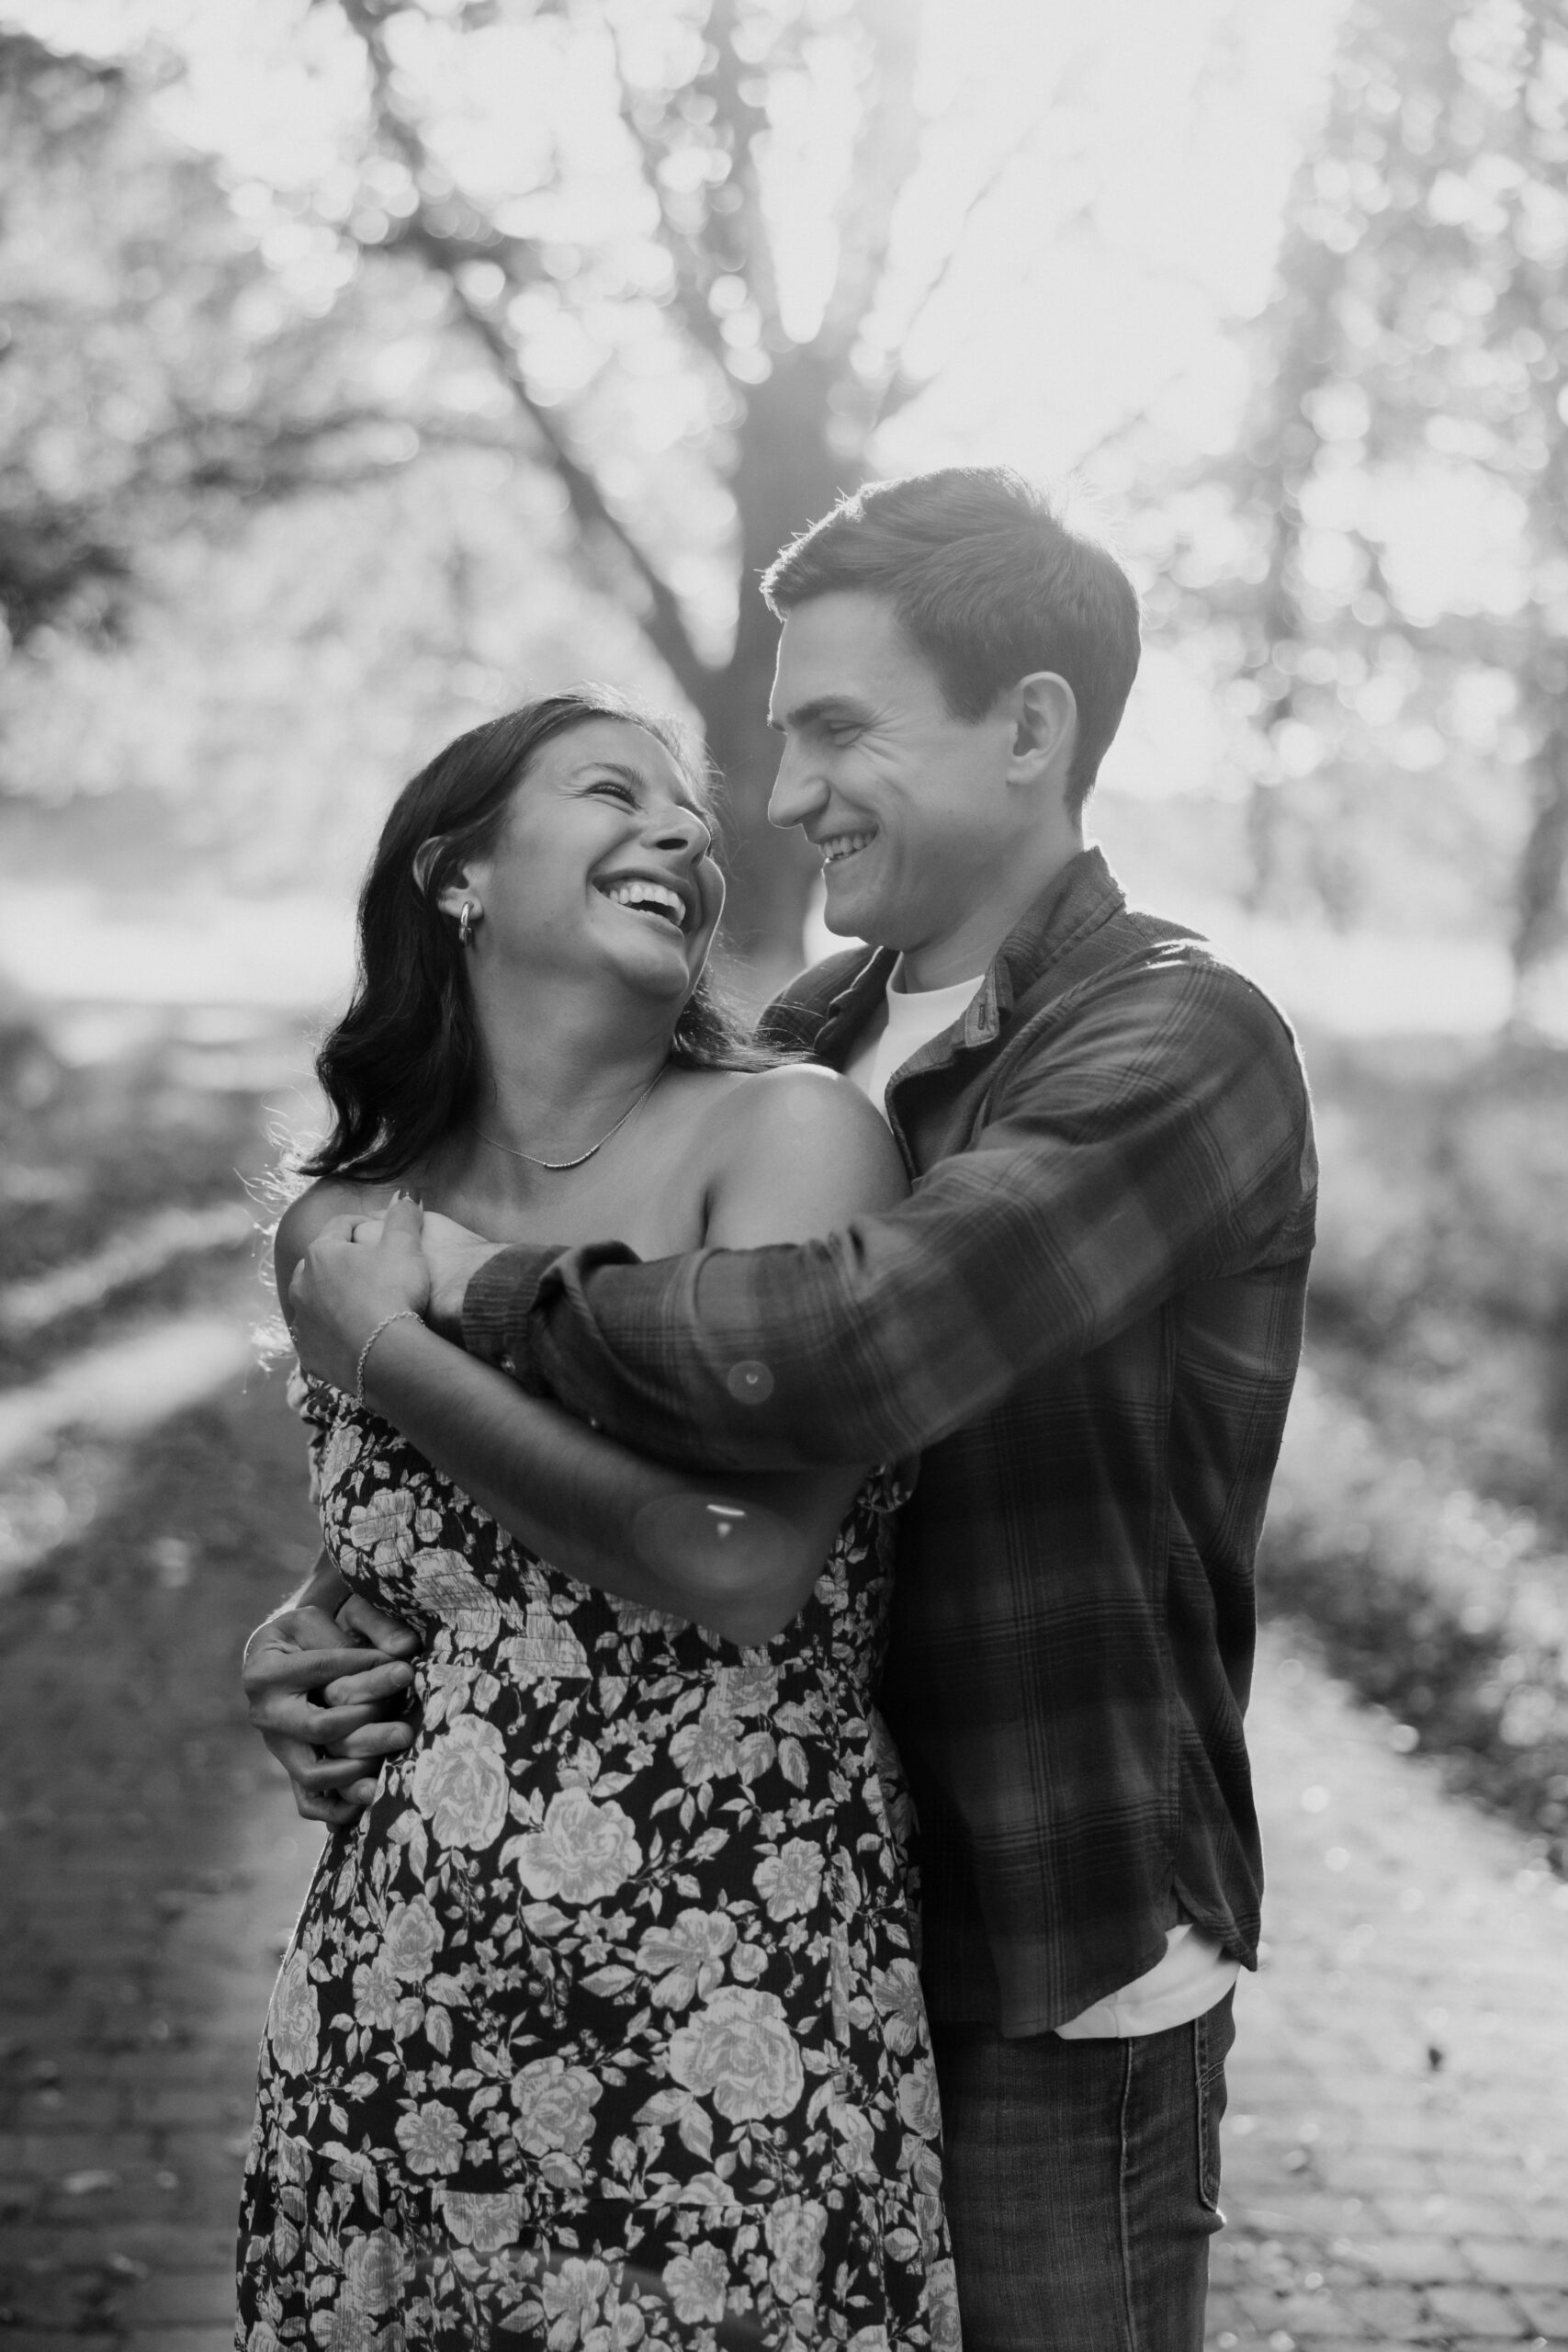 Beautiful couple hug under the trees during their casual engagement photos